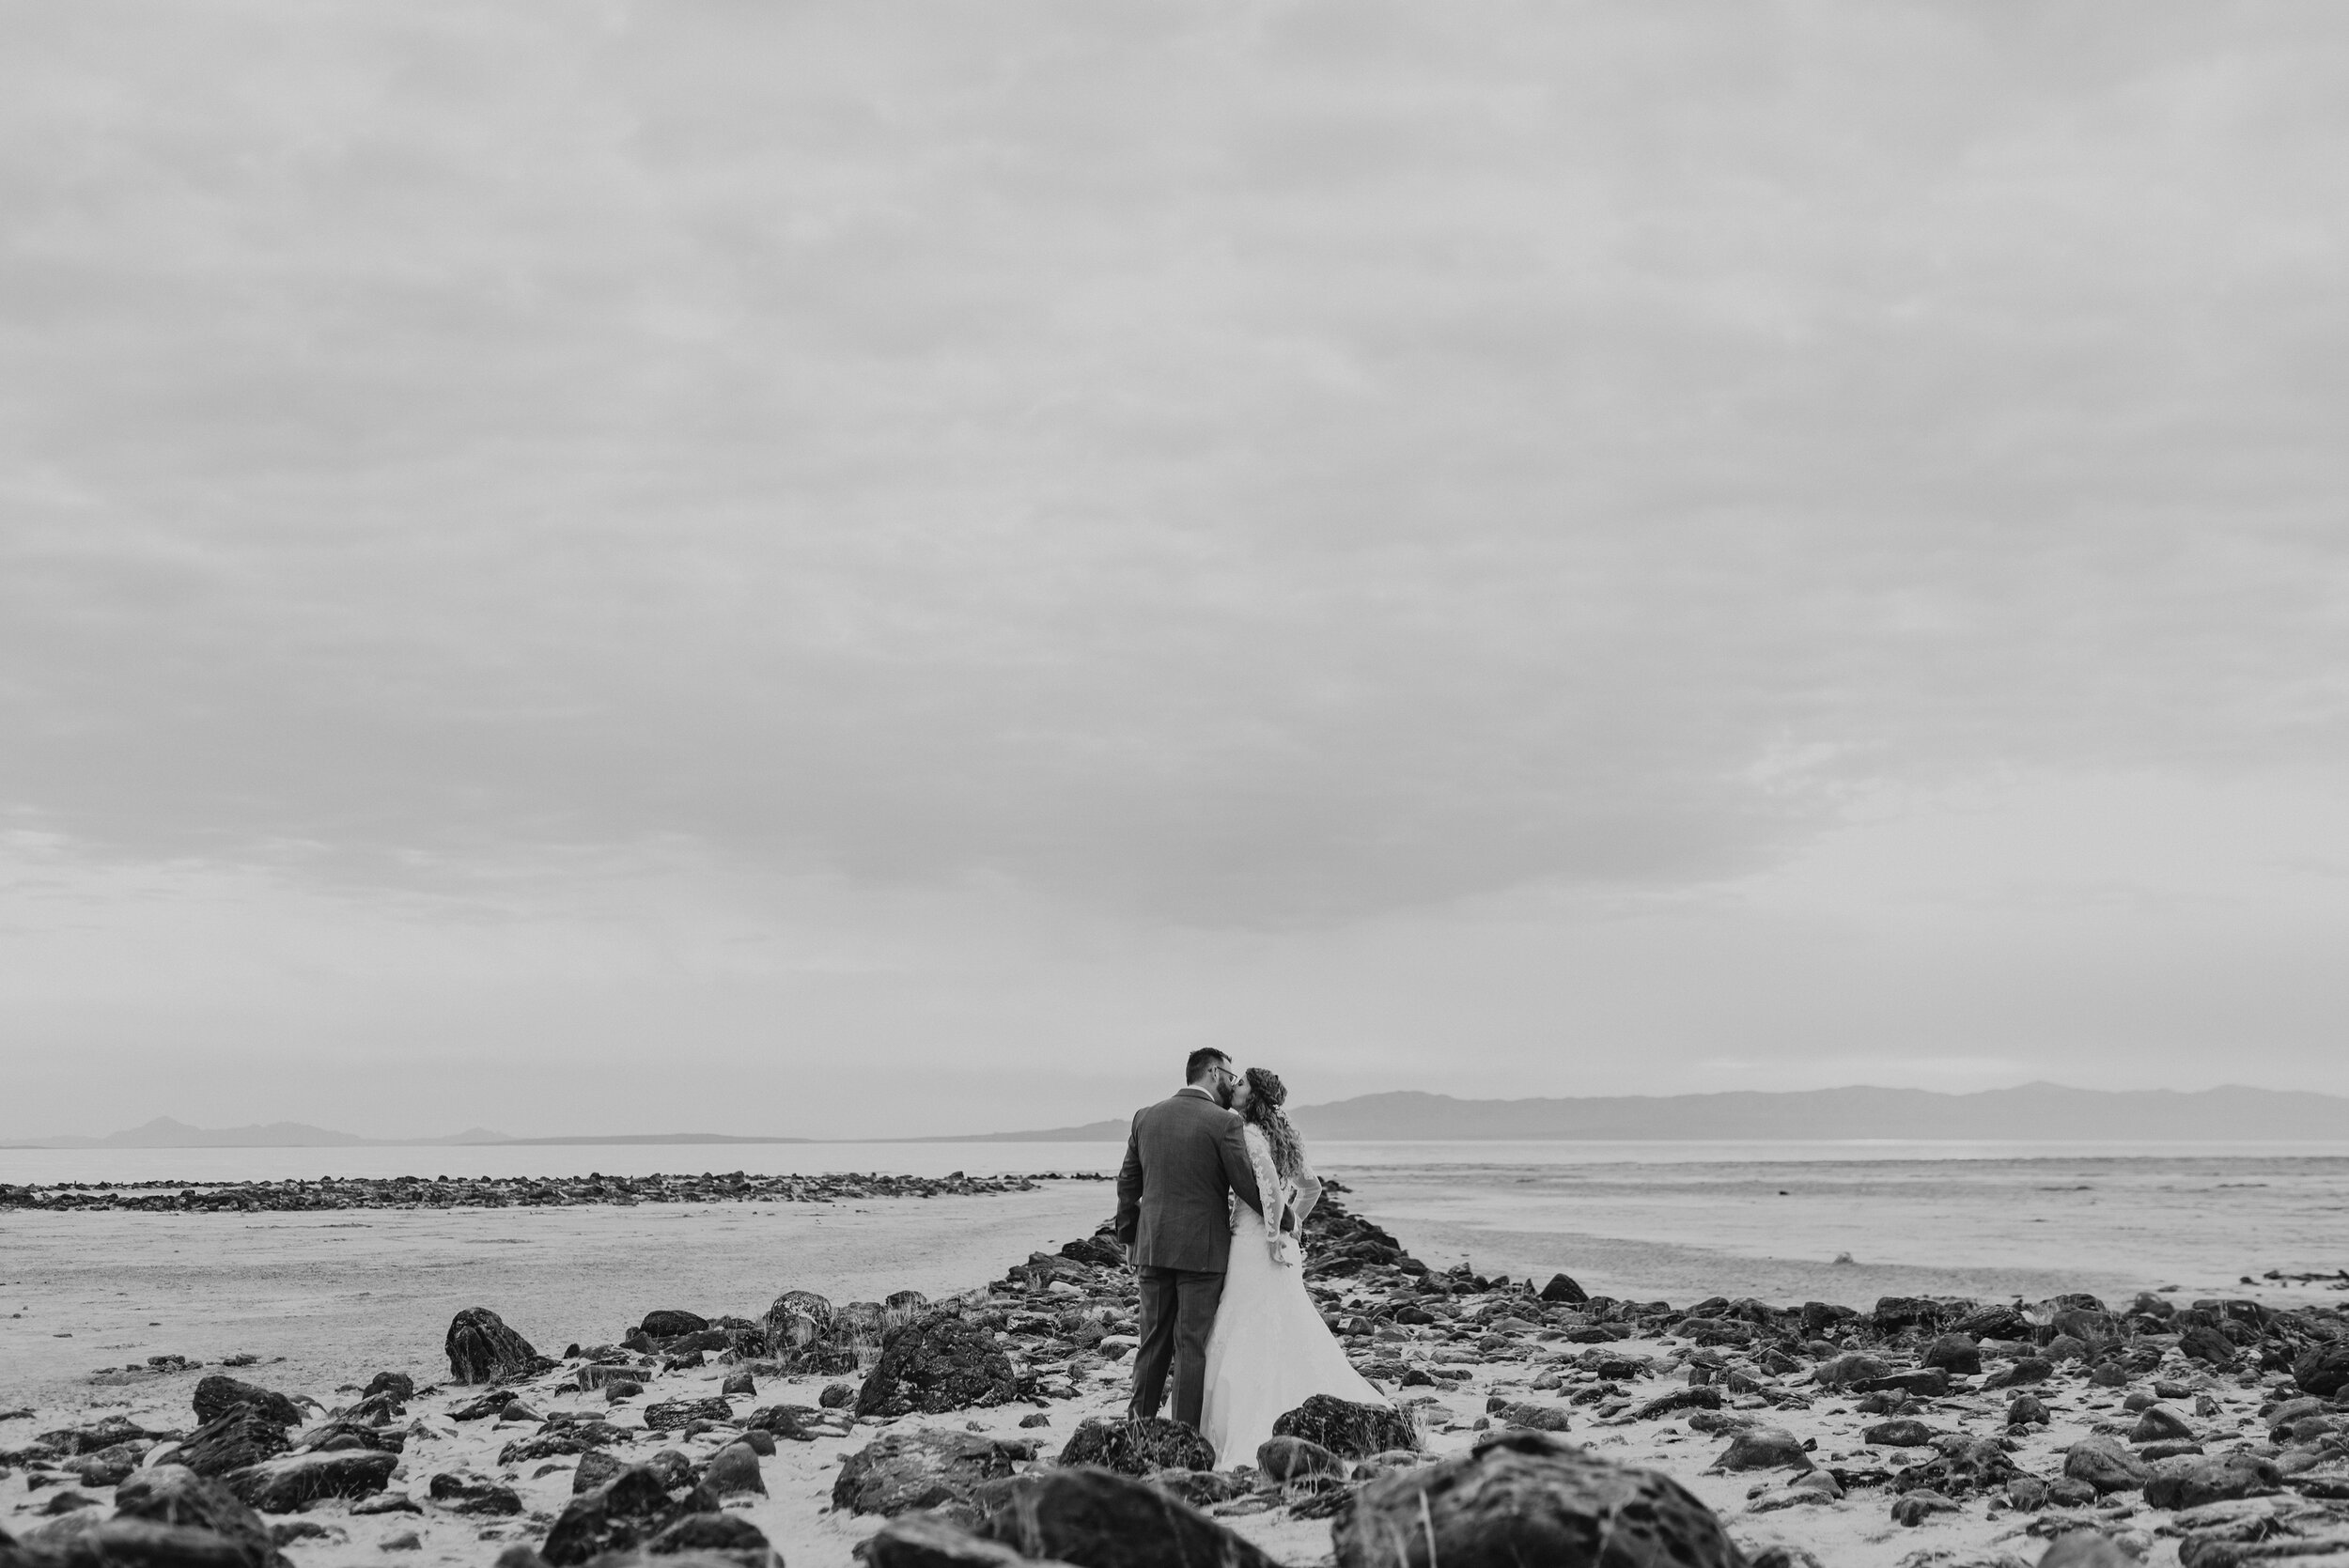  The bride and groom taking in all the excitement and natural beauty of their wedding formal photo session as they prepare to get married. Wedding formal photoshoot in Spiral Jetty Northern Utah Great Salt Lake photography wedding formals natural photo aesthetic bride and groom #spiraljetty #utahphotography #weddingformals #gettingmarried #weddingattire #utahwedding #greatoutdoorswedding #weddingformalsphotoshoot #naturalbeauty 